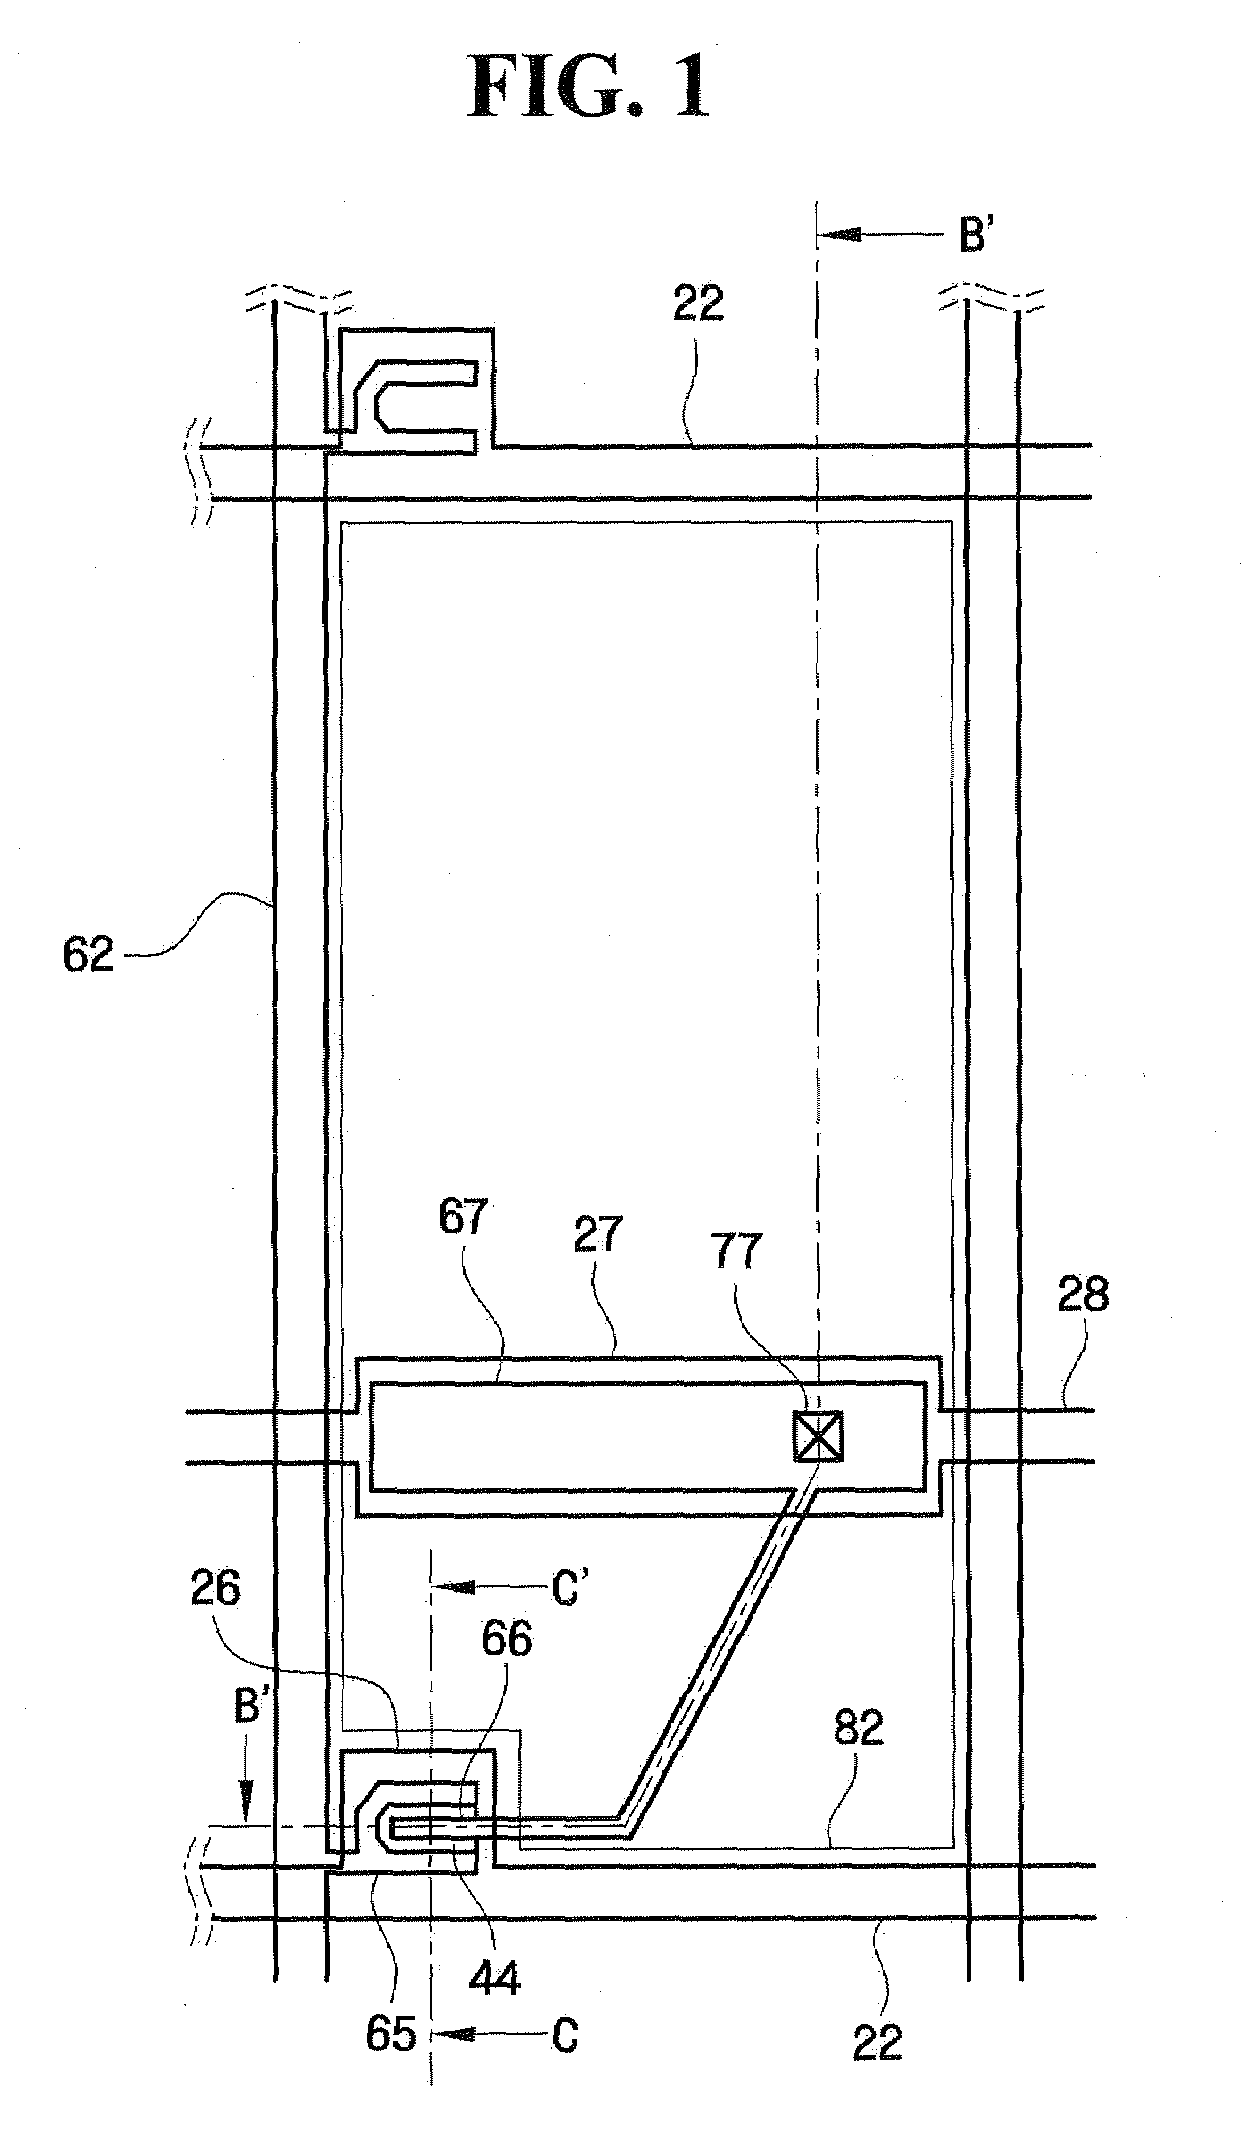 Thin-film transistor substrate and method of fabricating the same